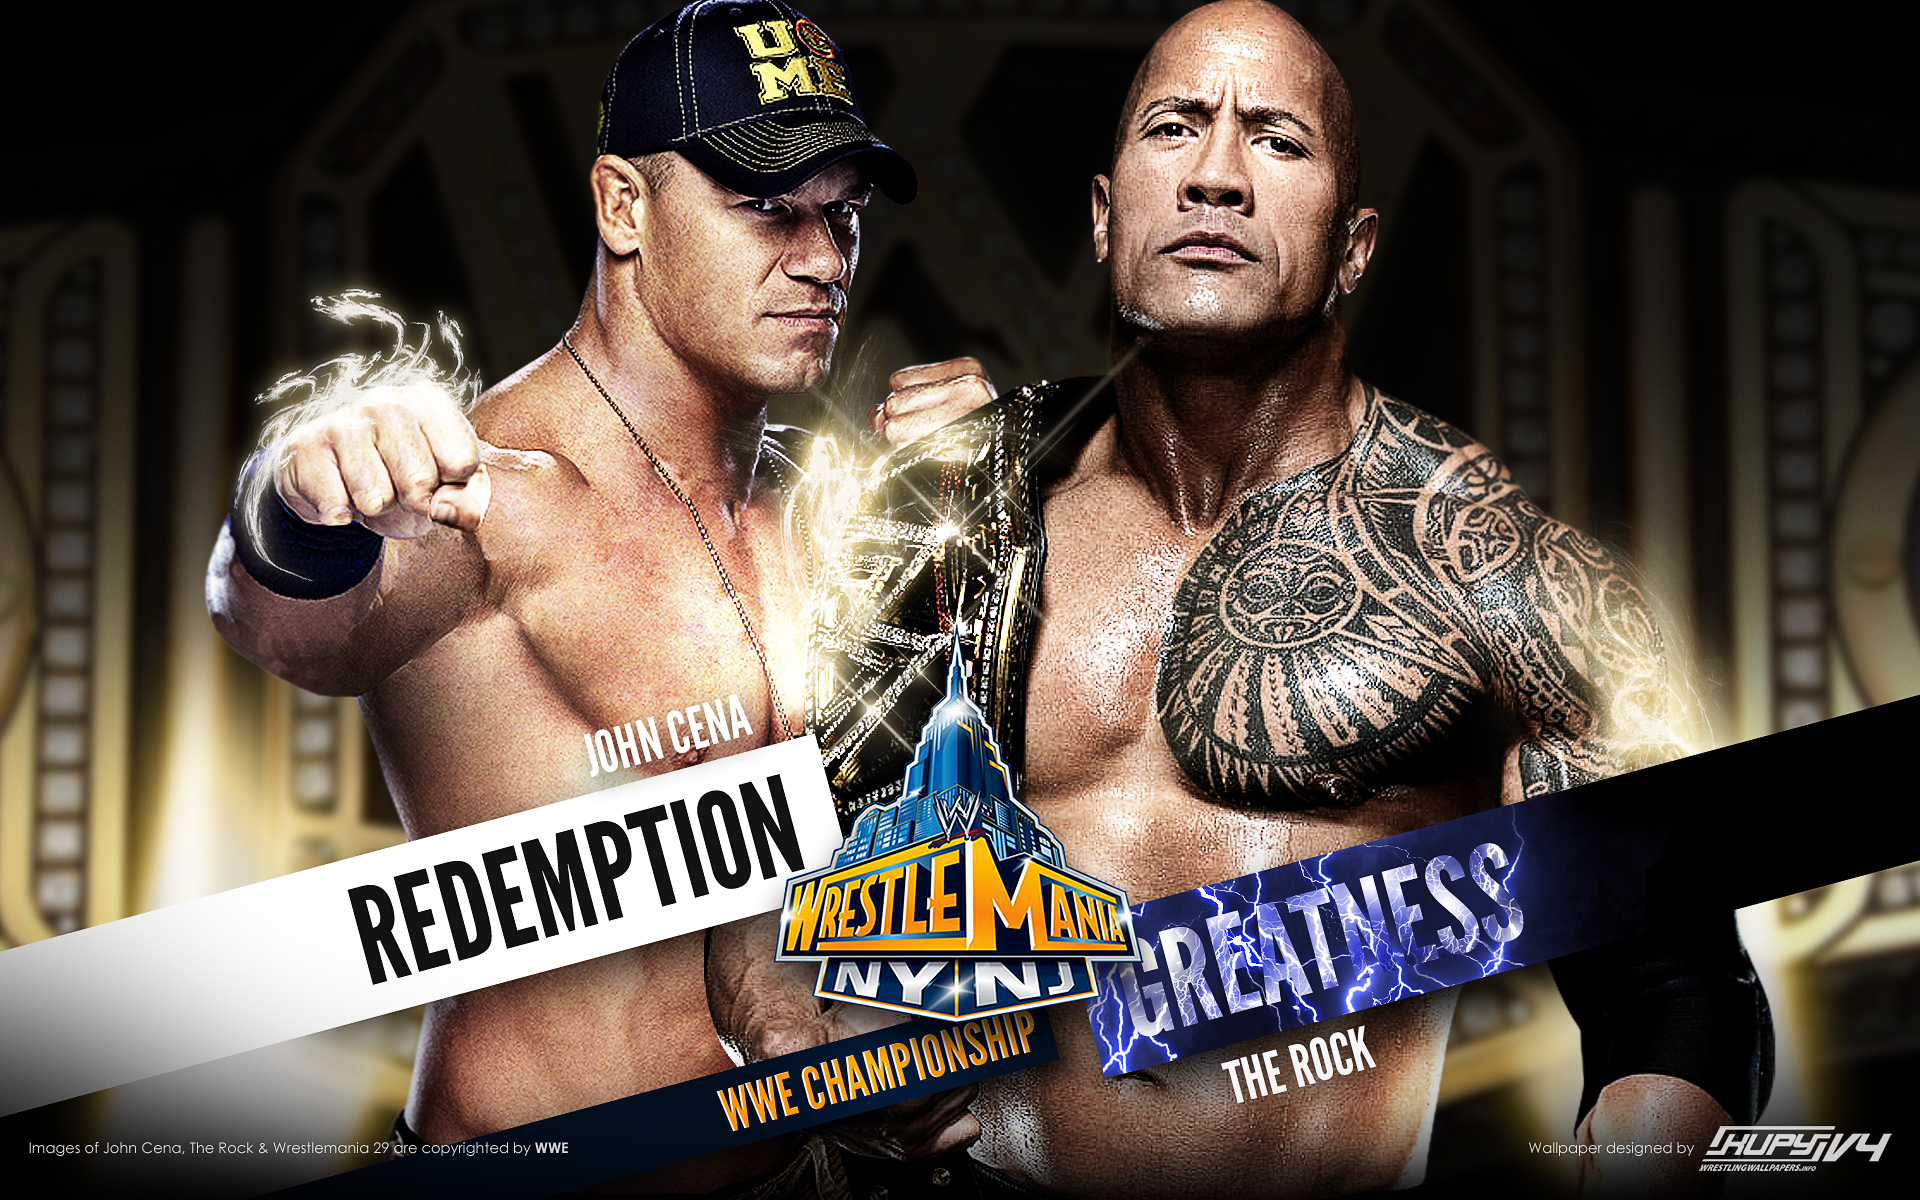 Kupy Wrestling Wallpapers The Latest Source For Your Wwe Wrestling Wallpaper Needs Mobile Hd And 4k Resolutions Available Blog Archive New Wrestlemania 29 Wallpaper The Rock Vs John Cena Ii